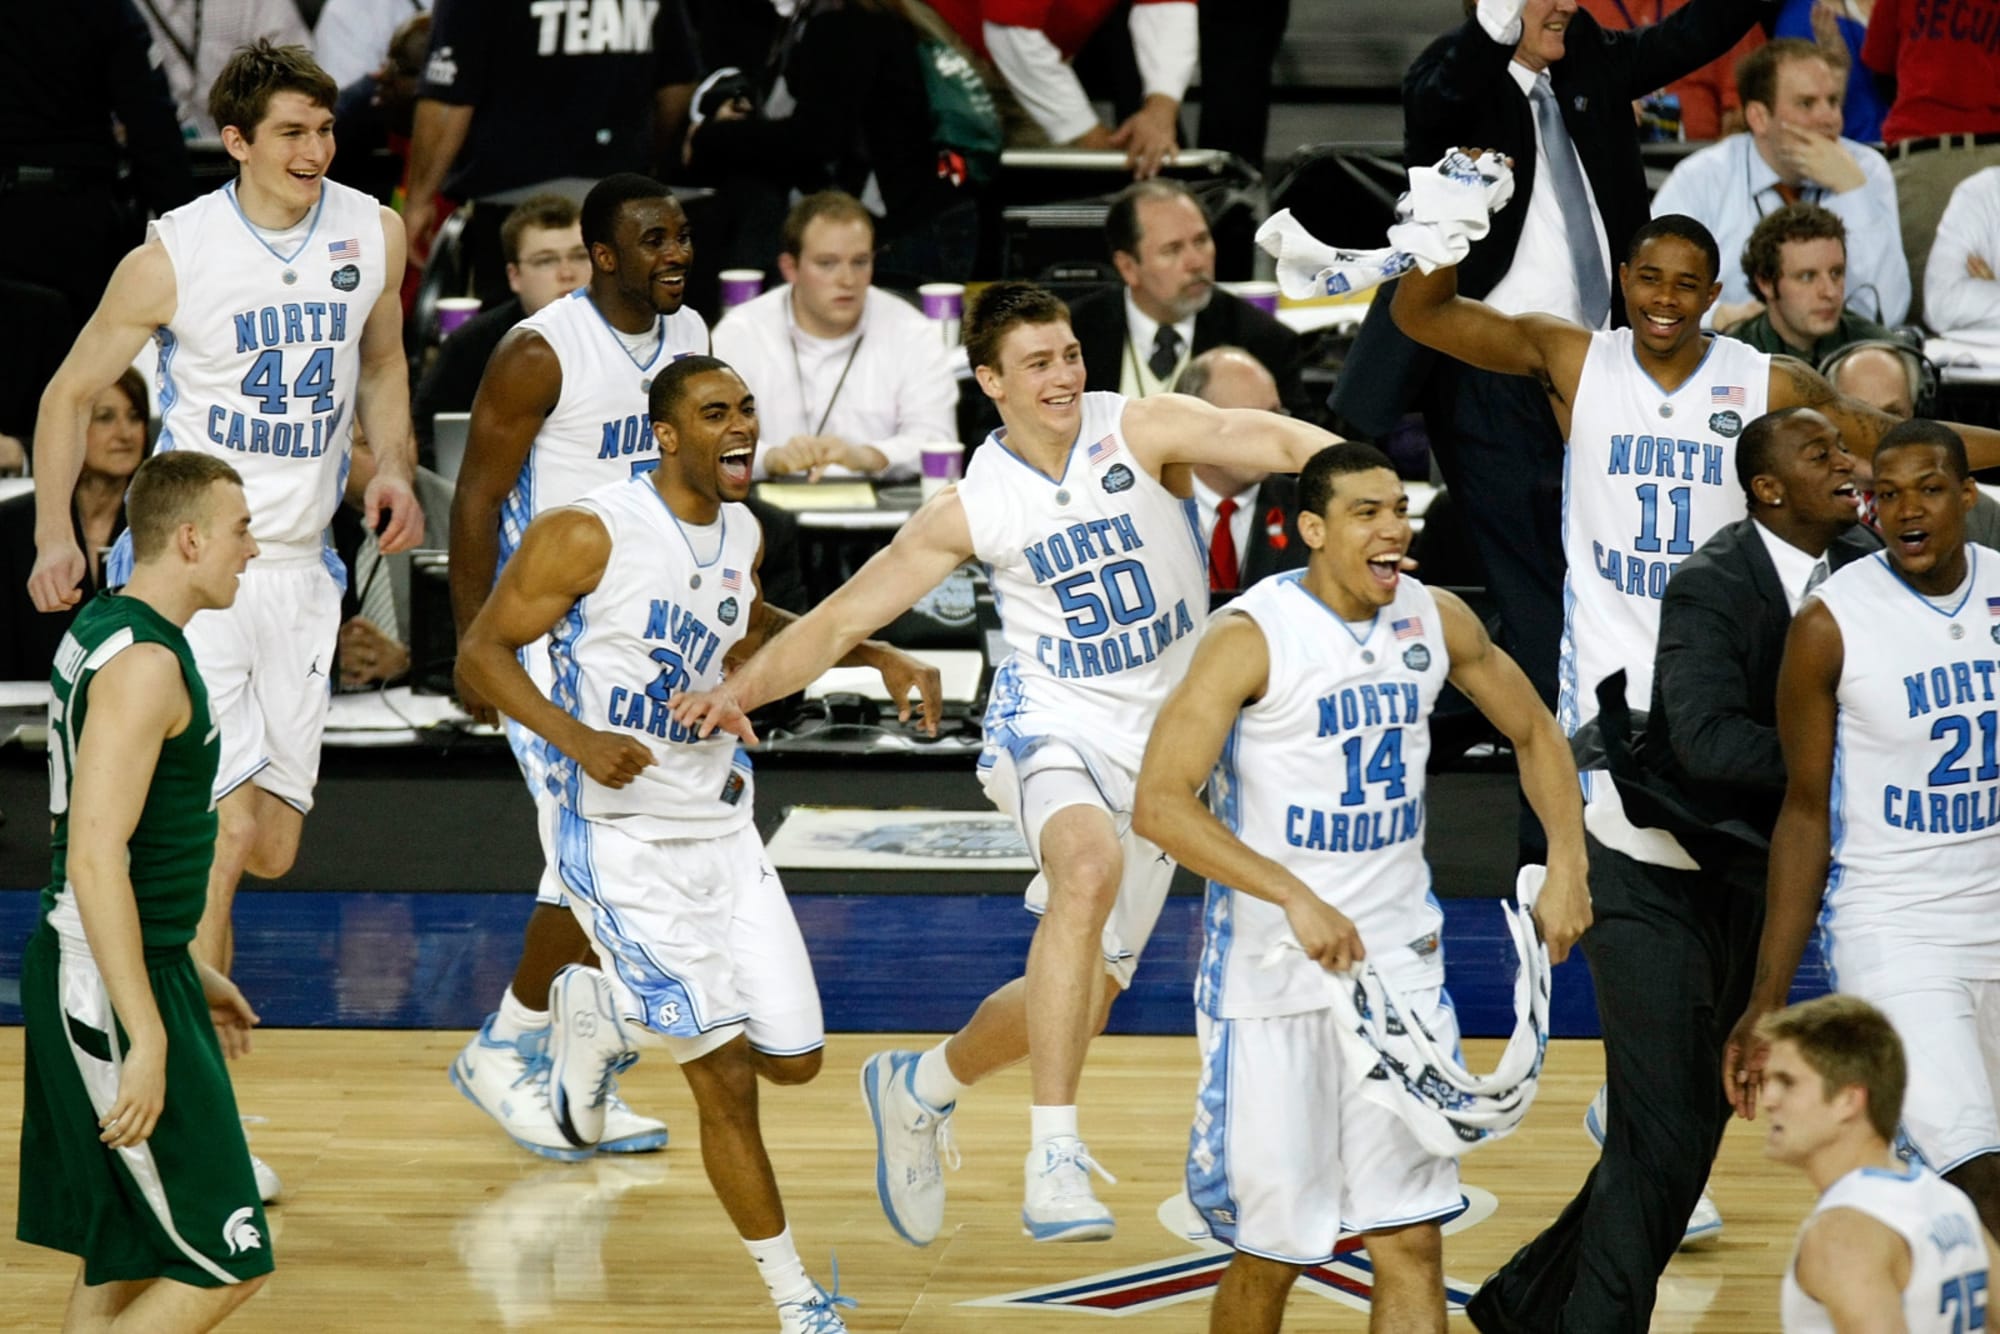 Redemption for 2009 Tar Heels completed in win over Michigan State